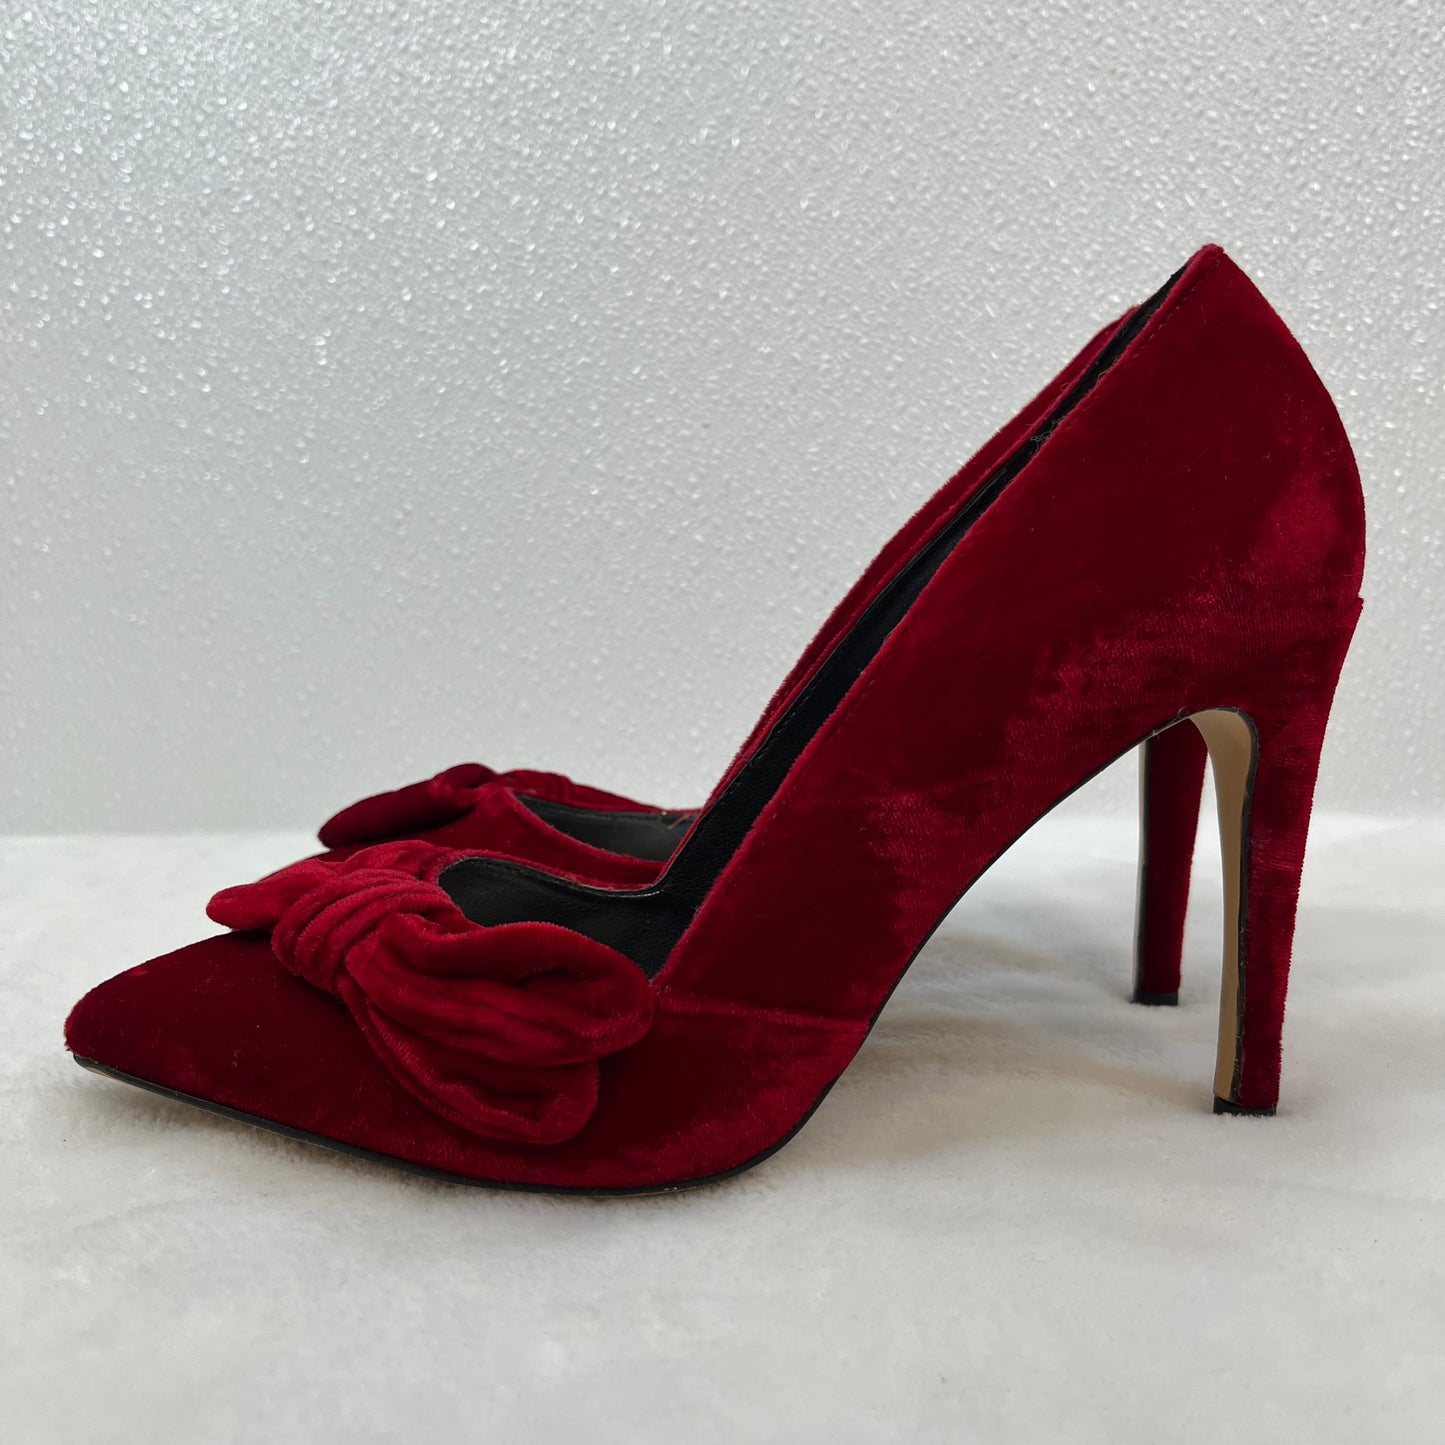 Shoes Heels Stiletto By Marc Fisher  Size: 7.5